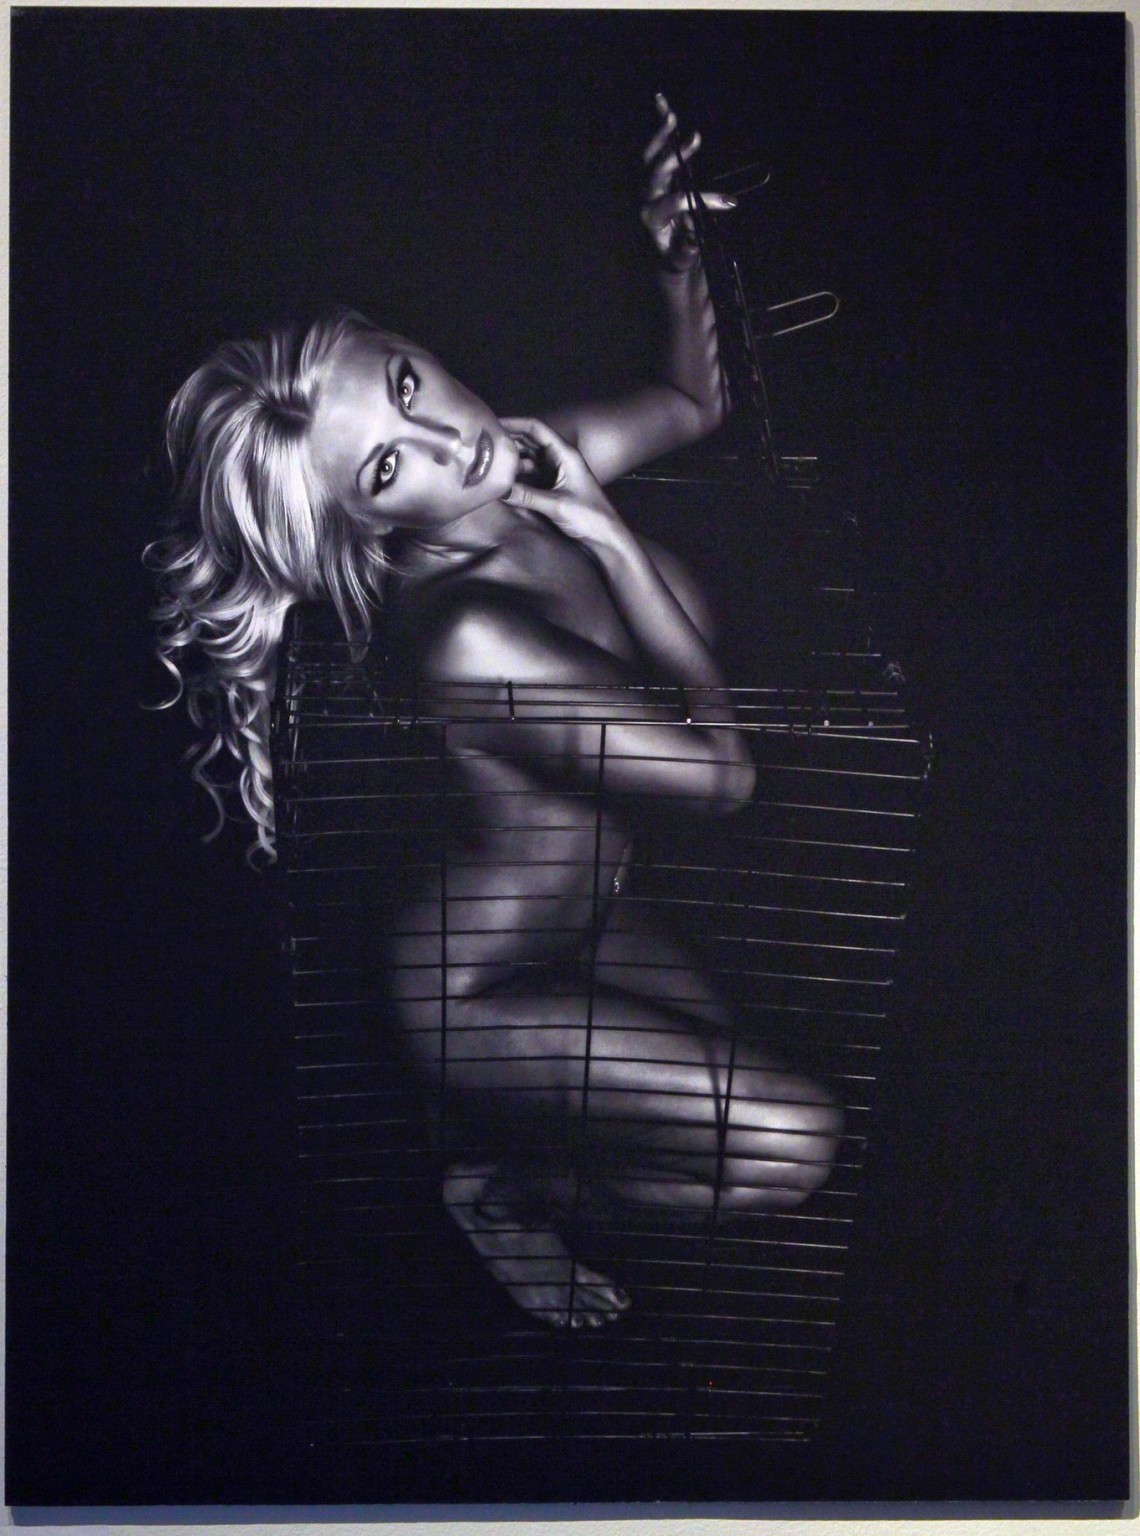 Brooke Hogan nude in cage for new PETA ad campaign #75292029